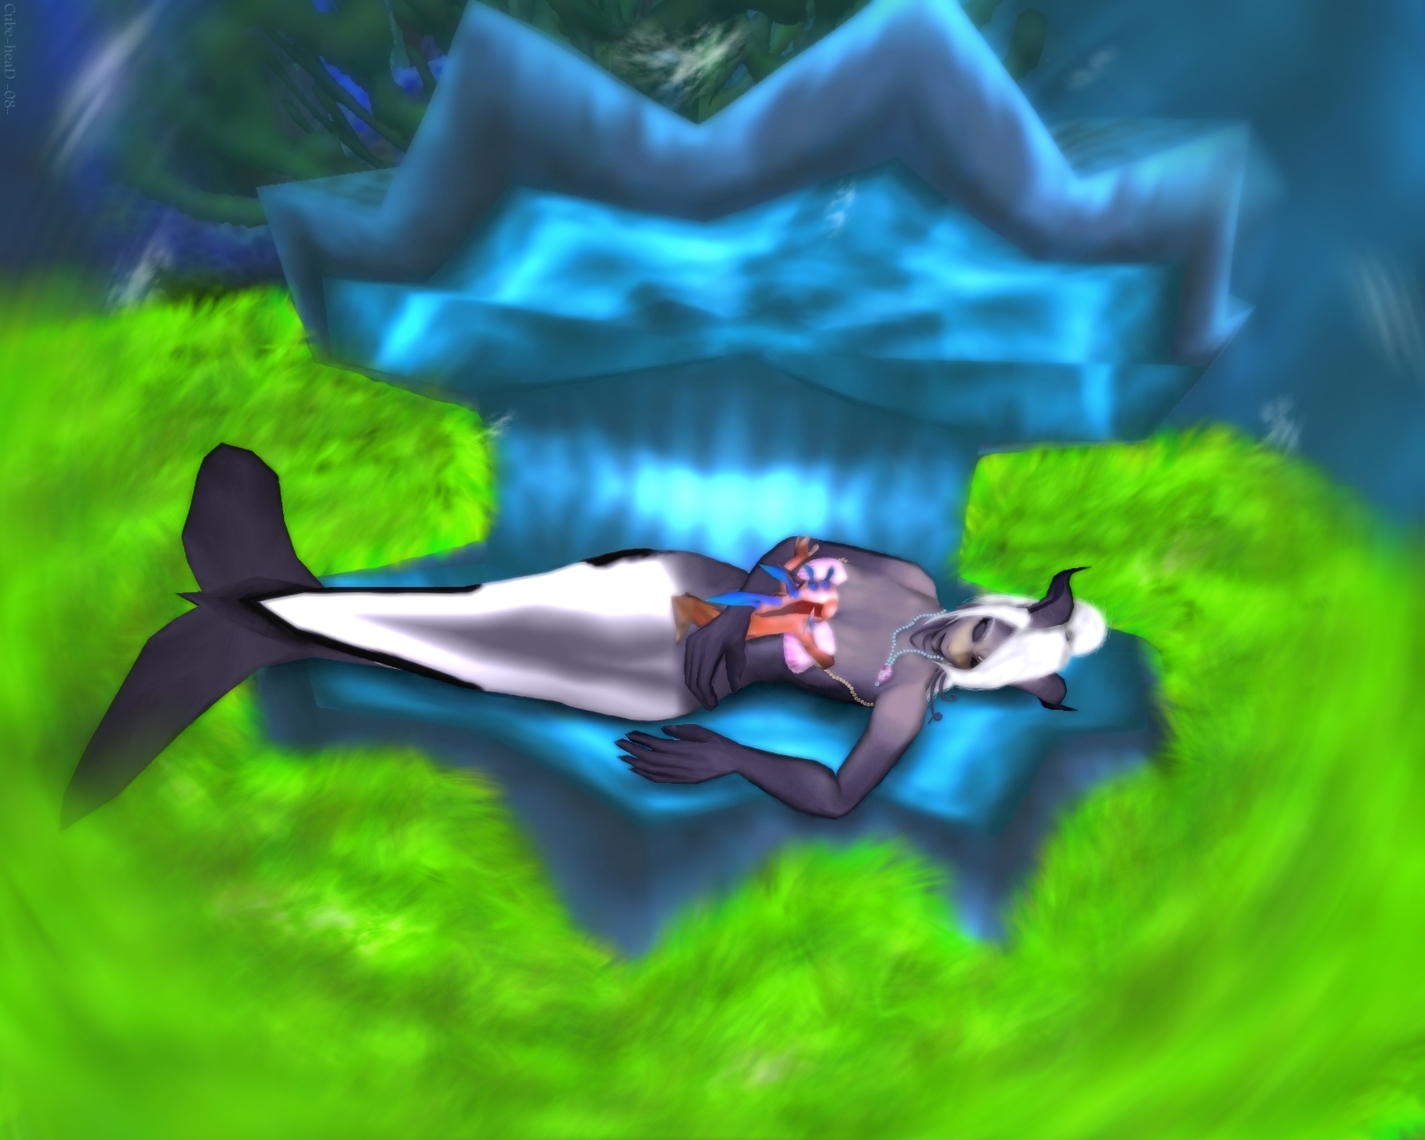 Sleepy Sweepy SeaSel~ [Draenei/SFW/Anthro]
SeaSel taking a soothing sleep at her hidden giant-clam with one of her favorite friend.
Keywords: Draenei;SFW;Anthro;Murloc